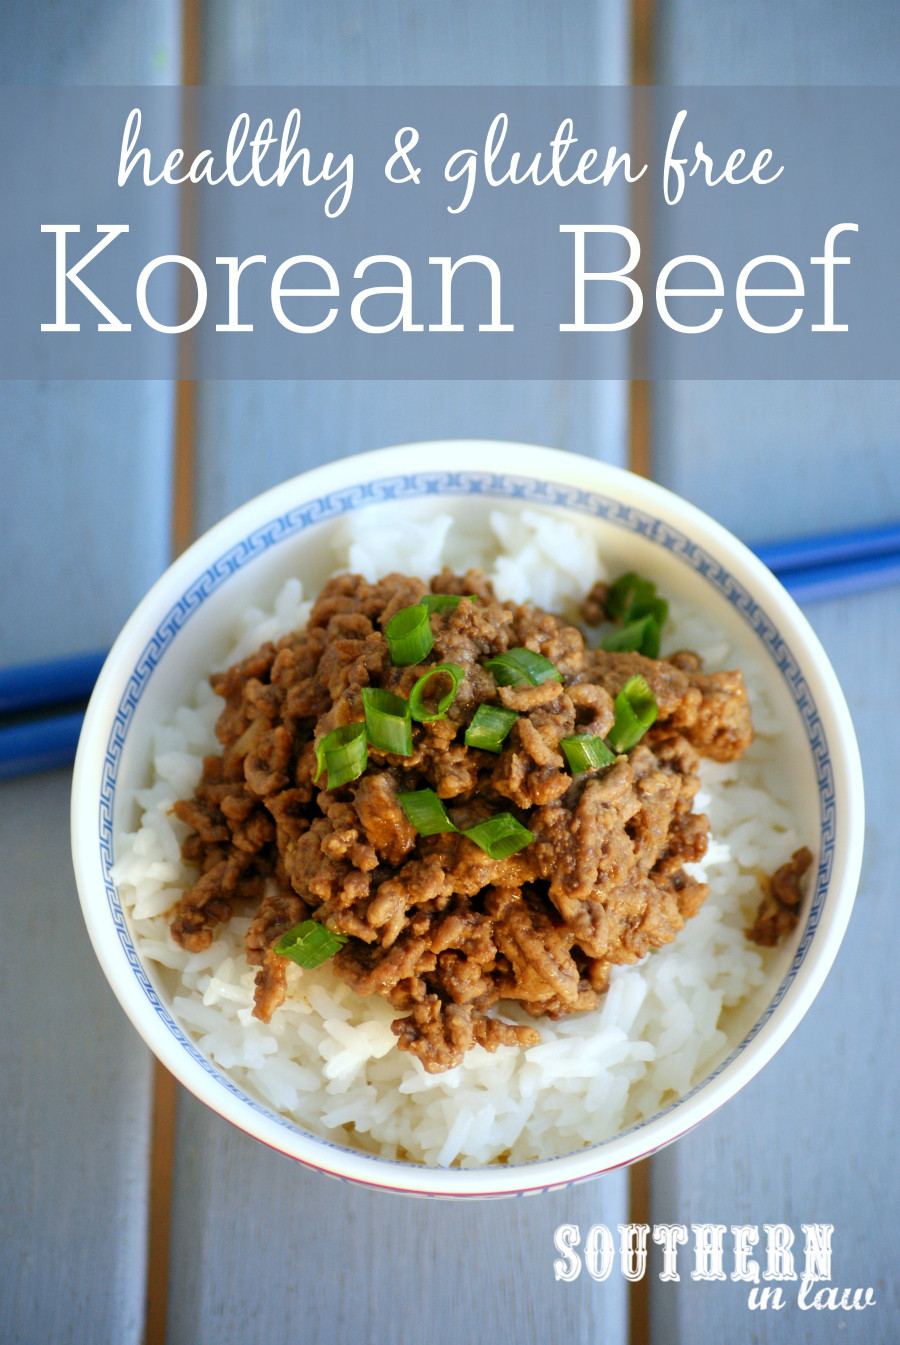 Low Calorie Recipes Ground Beef
 Southern In Law Recipe Healthy Korean Beef Stir Fry